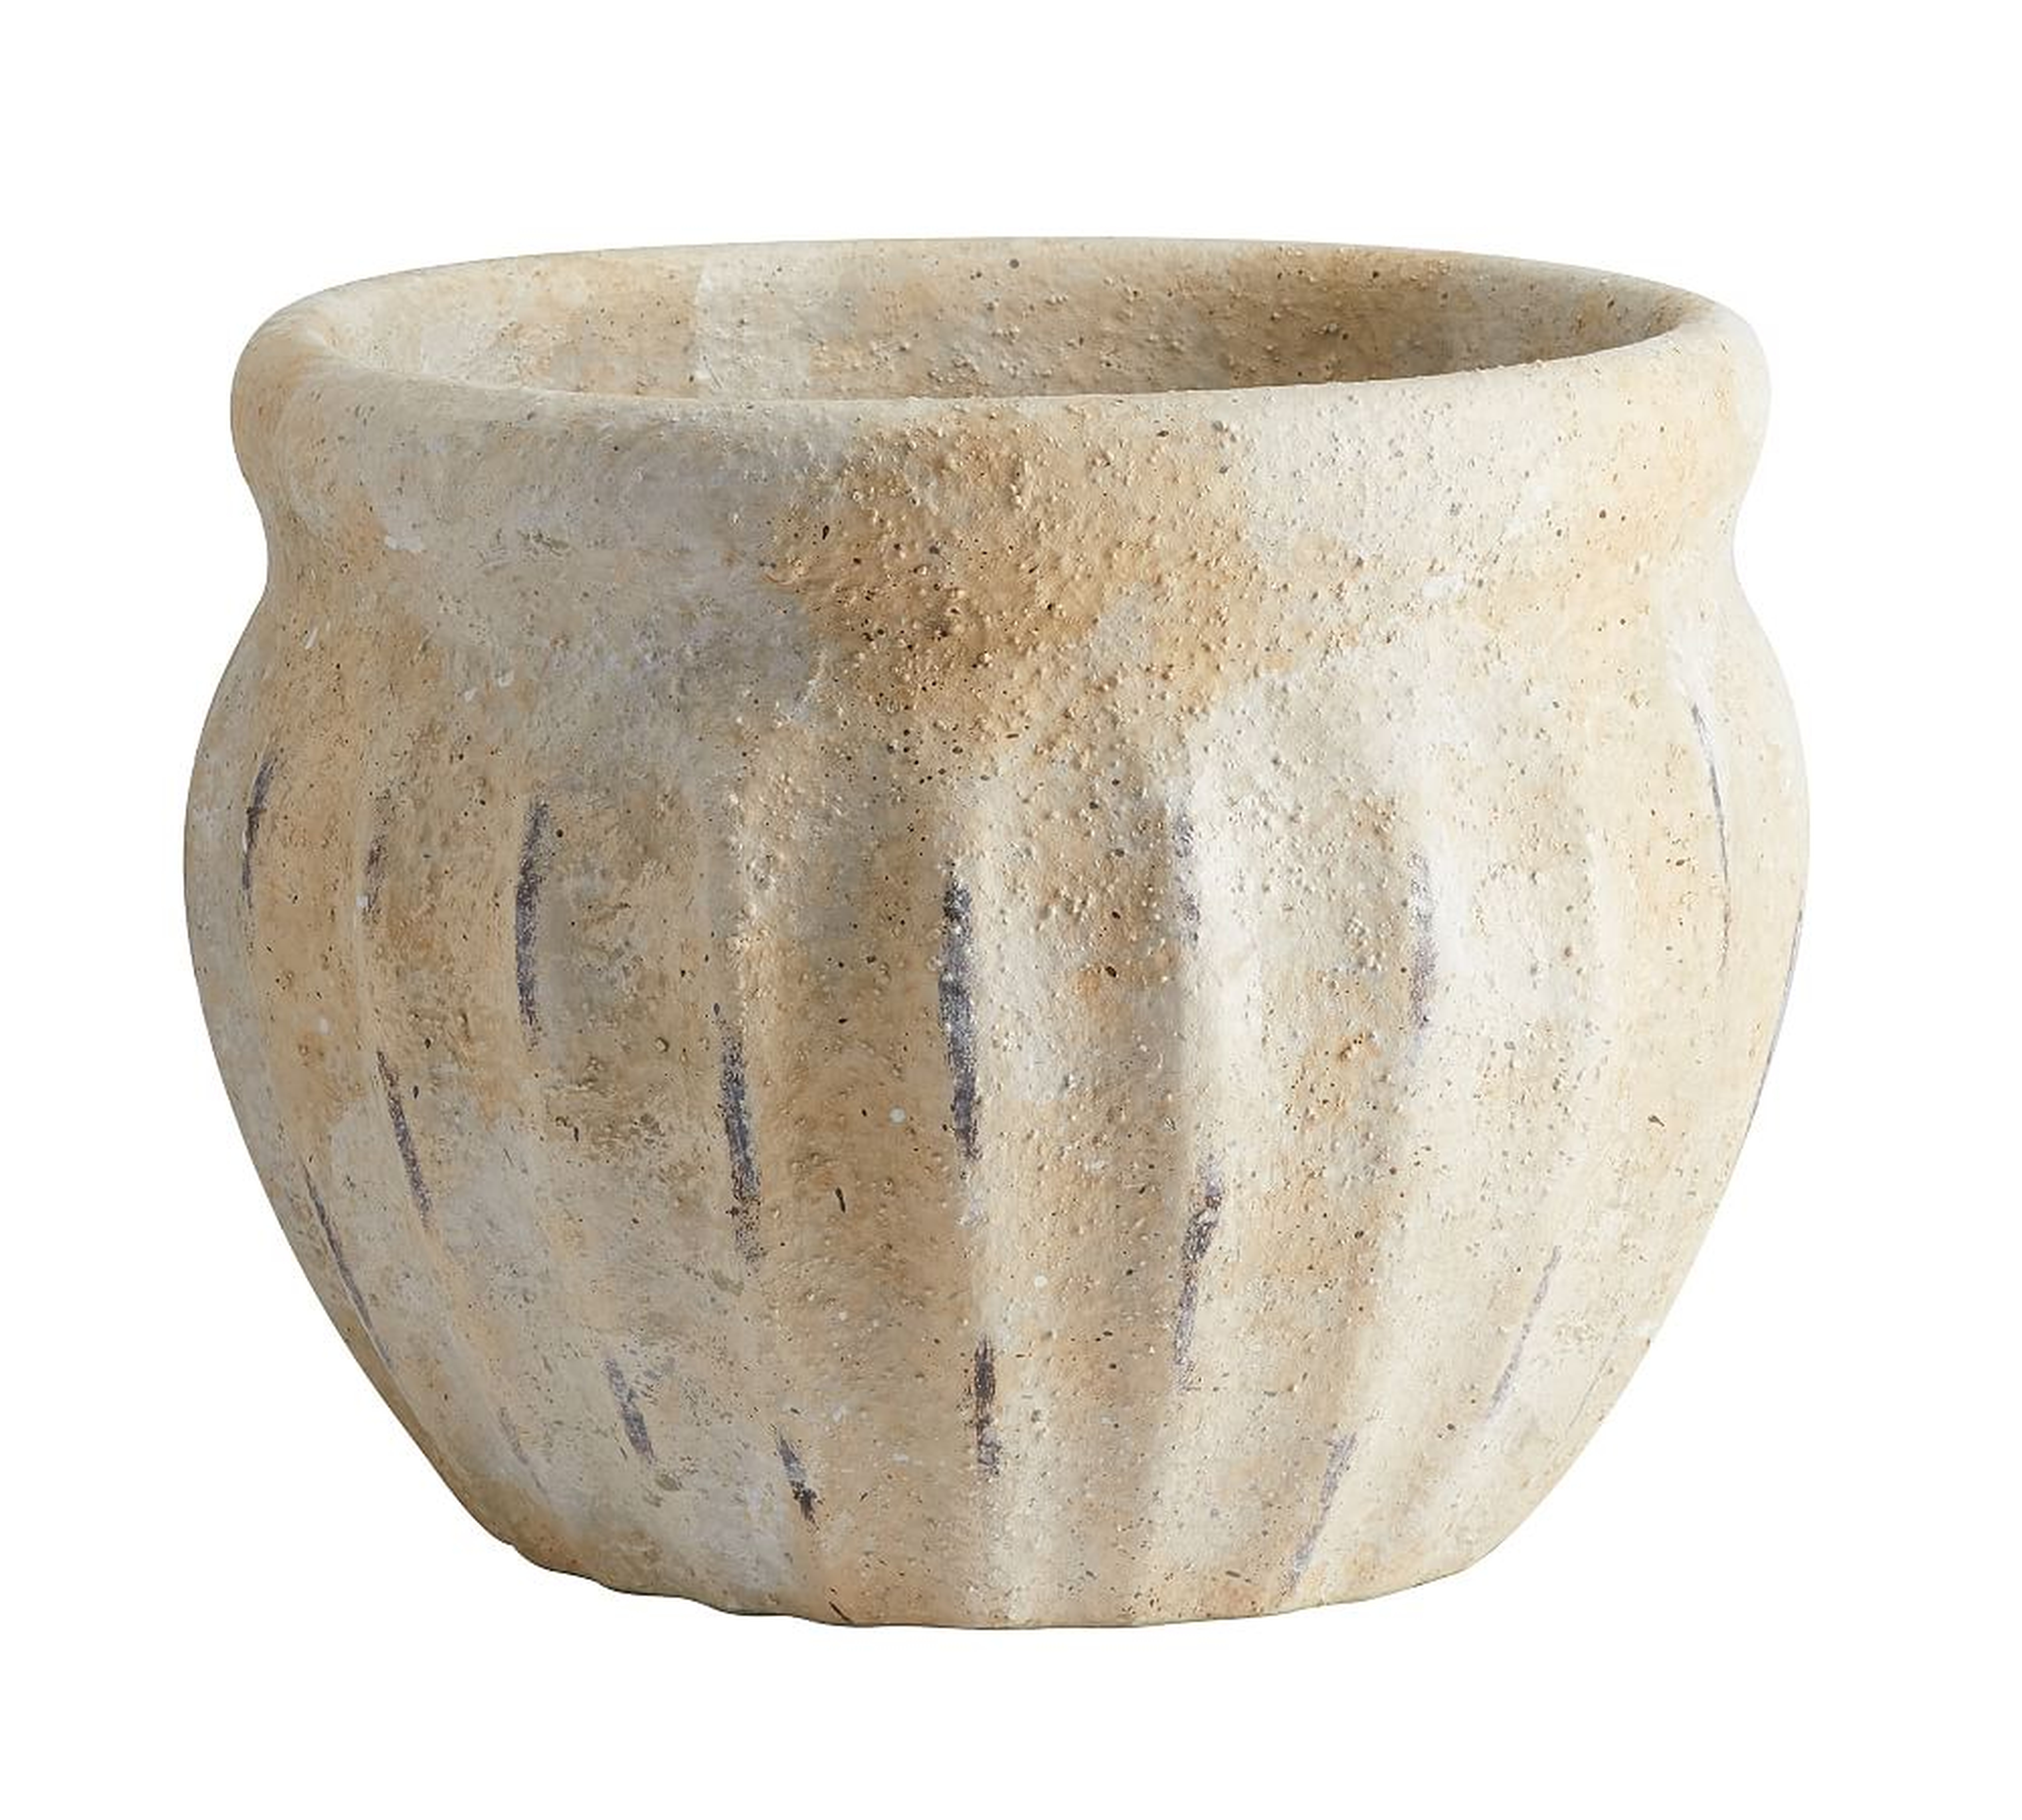 Weathered Handcrafted Terra Cotta Planter - Pottery Barn